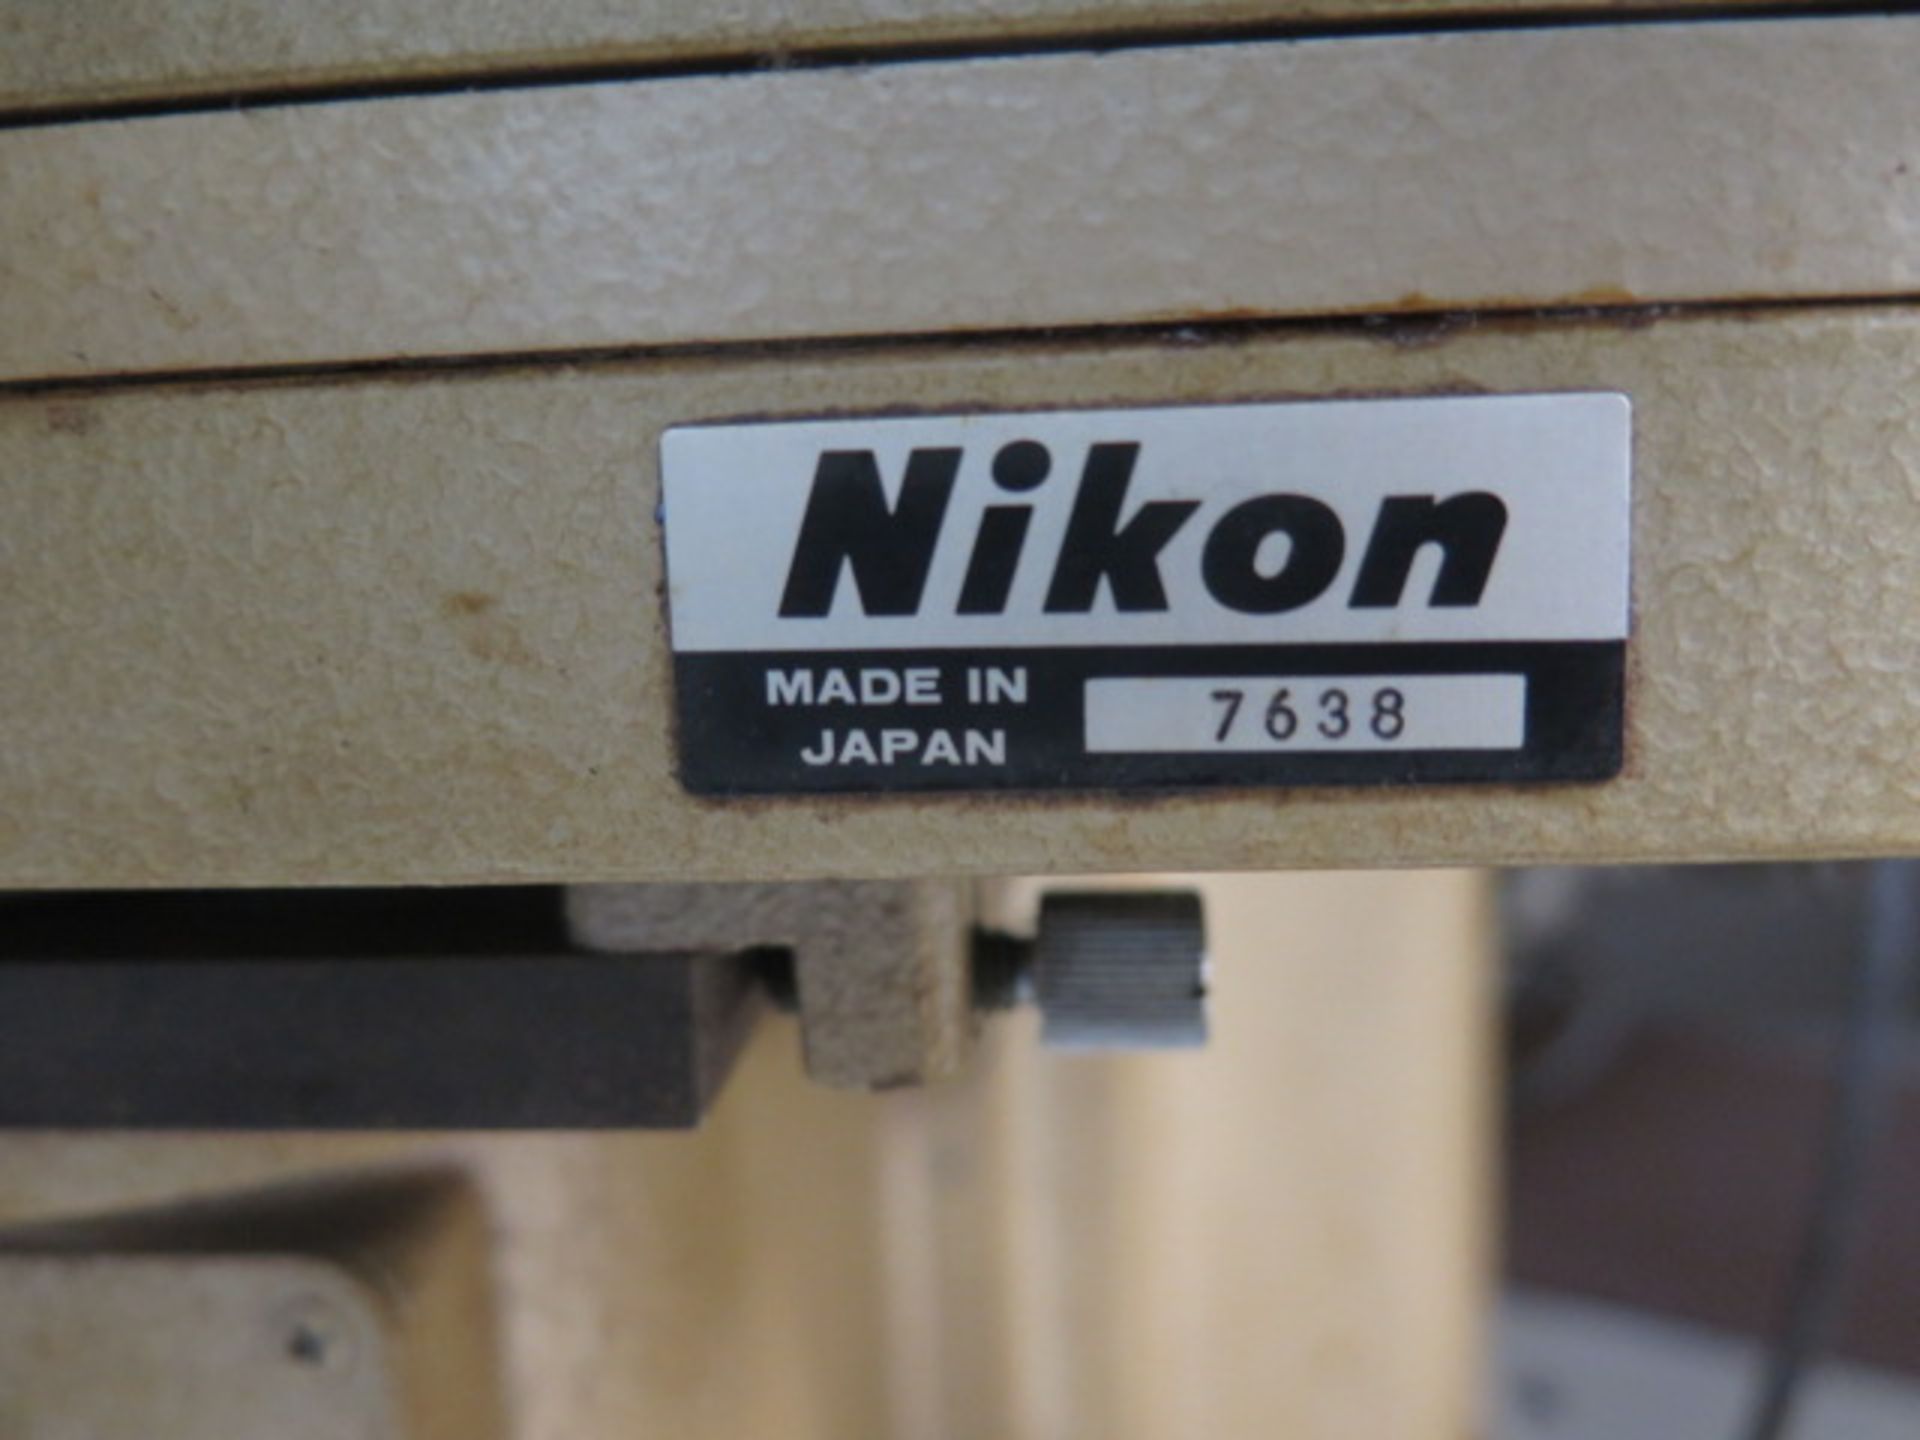 Nikon mdl. V-14 14" Optical Comparator s/n 36698 w/ Autometronics DRO, 20X, 50X and 300X, SOLD AS IS - Image 13 of 13